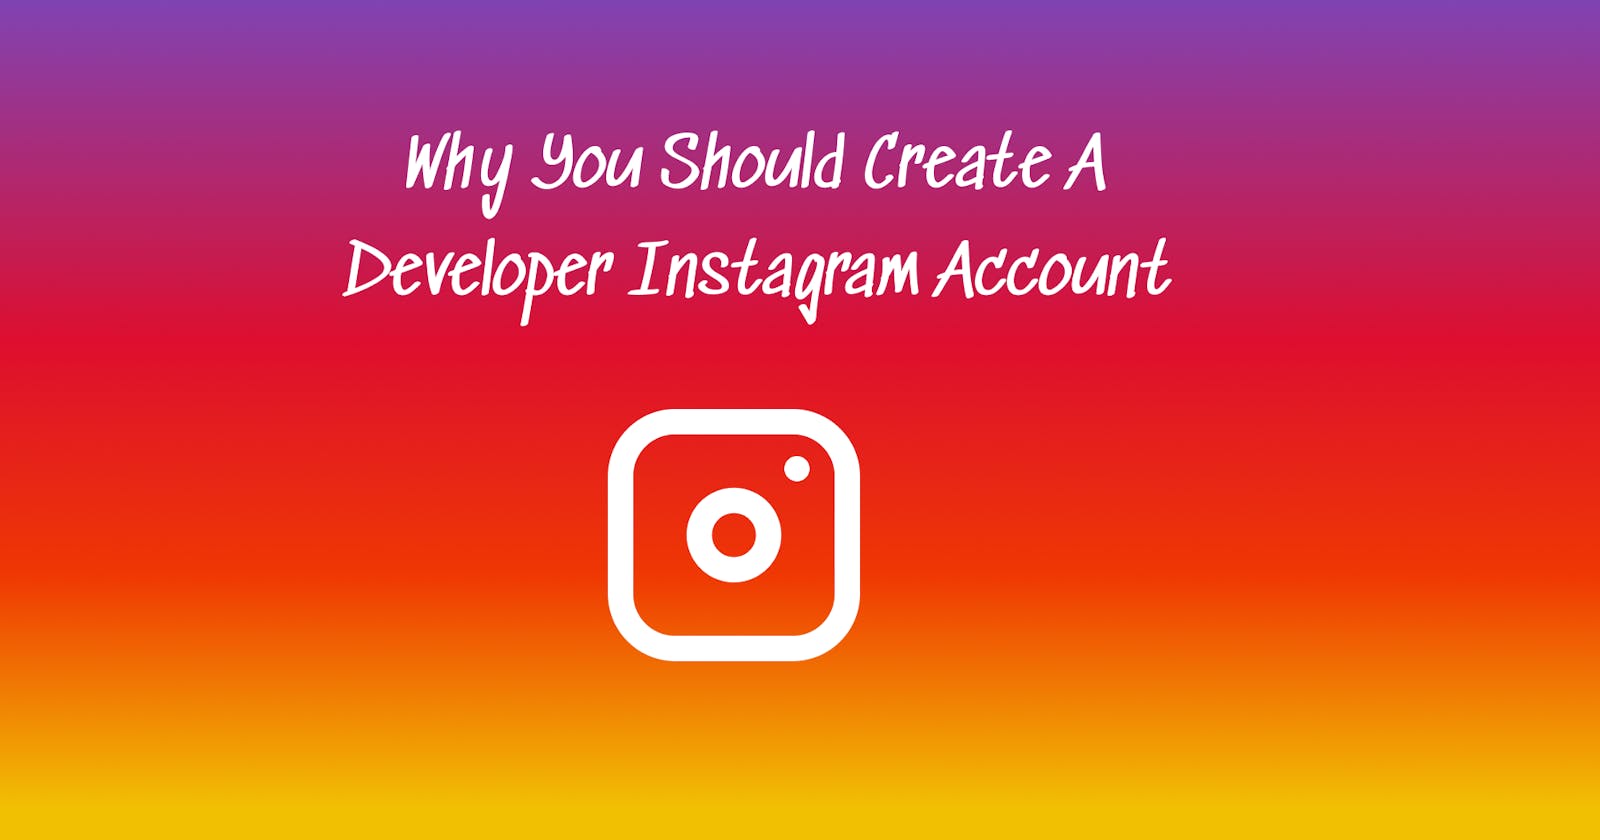 Why you should create a developer Instagram account